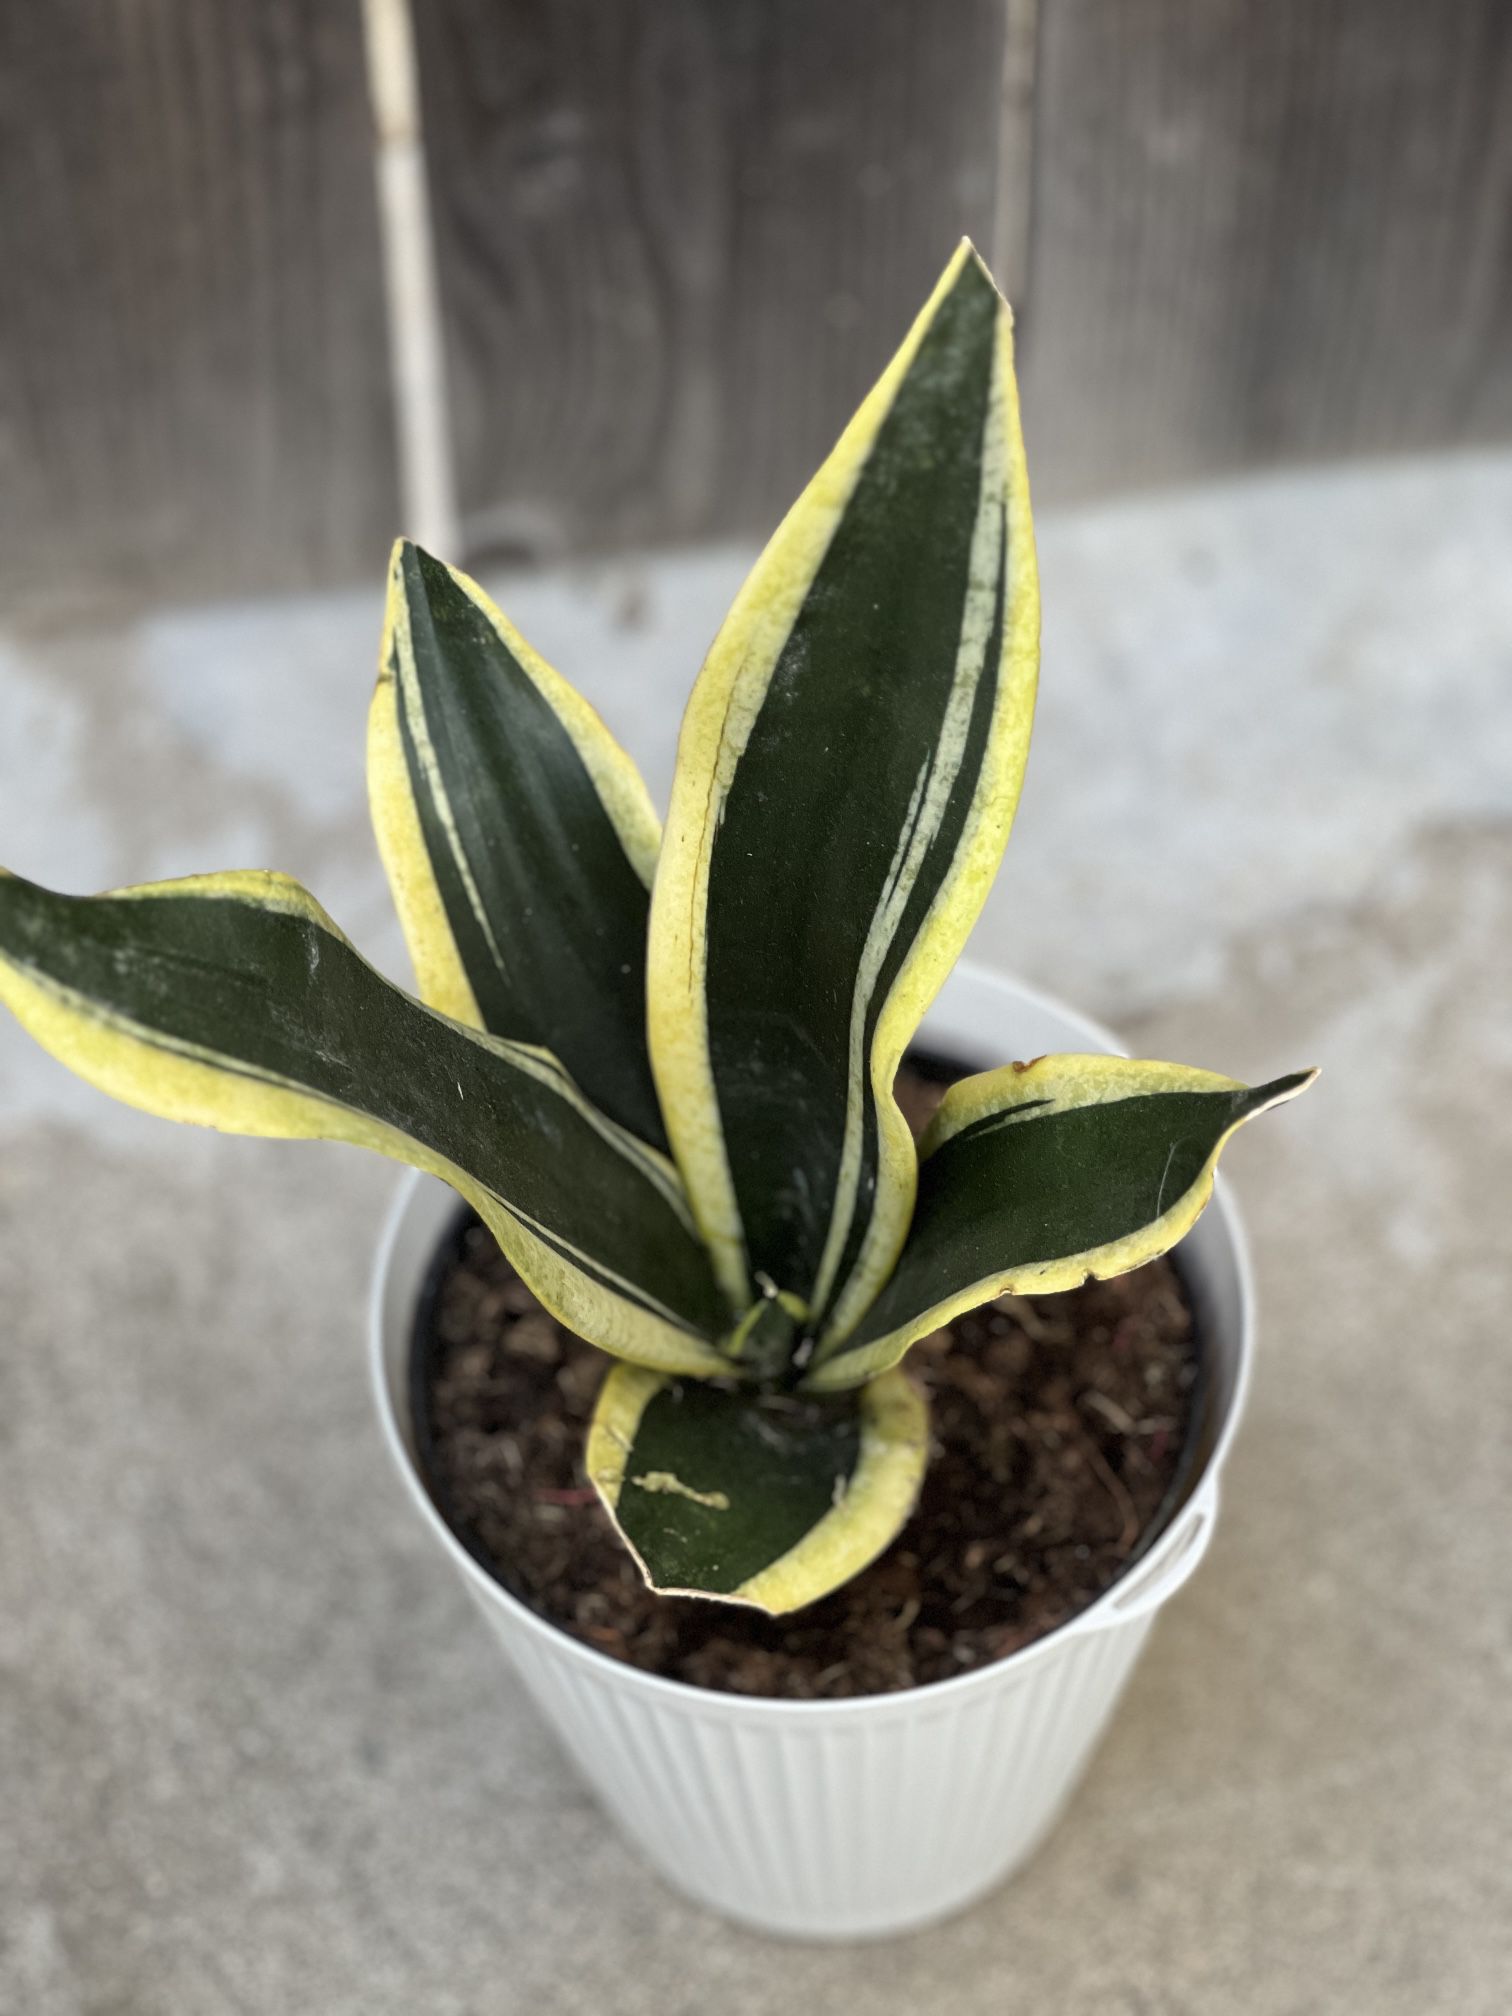 Snake Plant Sansevieria Golden Yellow and Green House Plant in Decorative White Pot  Cash only